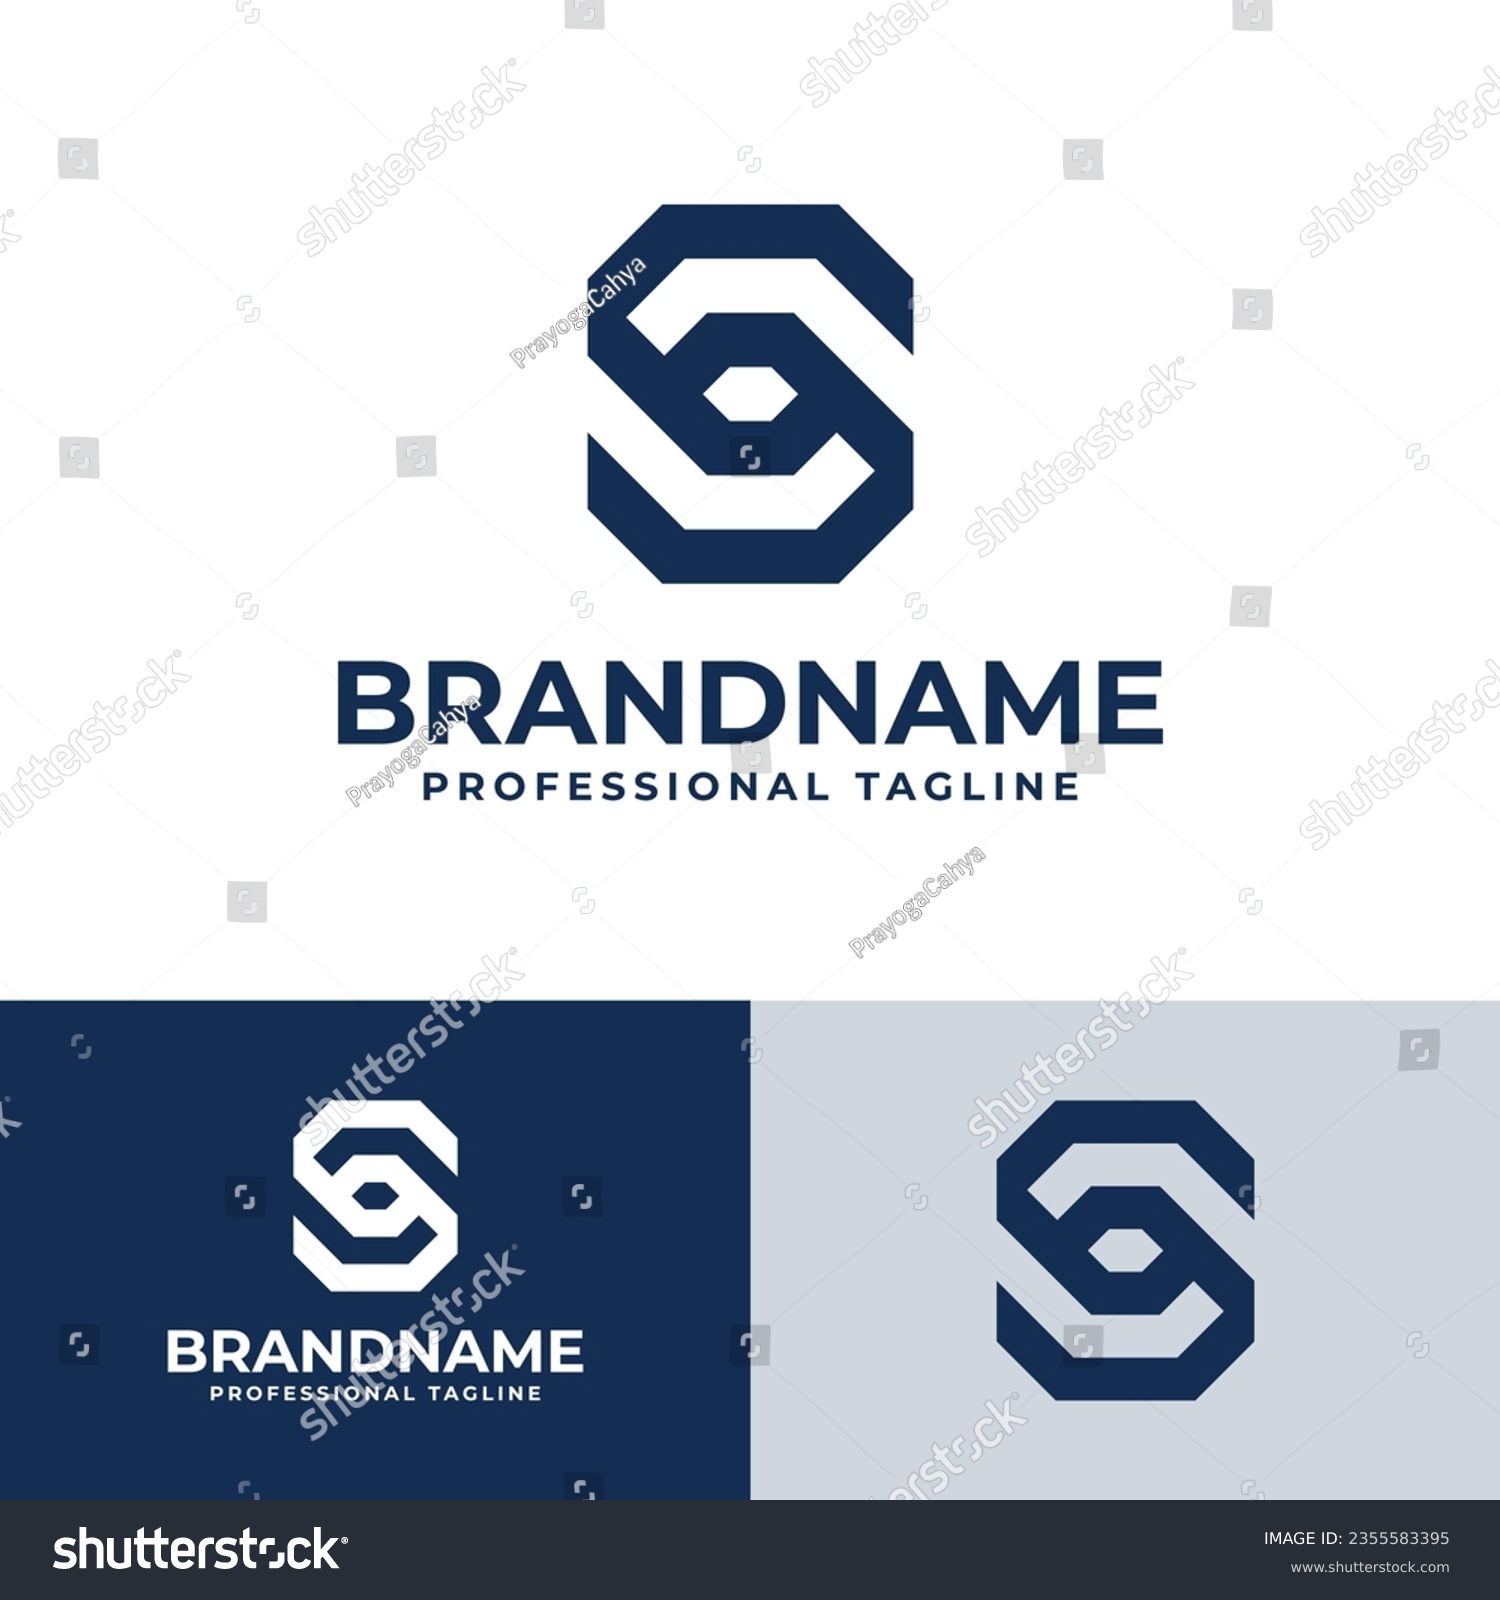 SVG of Letter S Diamond Logo, suitable for any business related to Diamond with S initial. svg